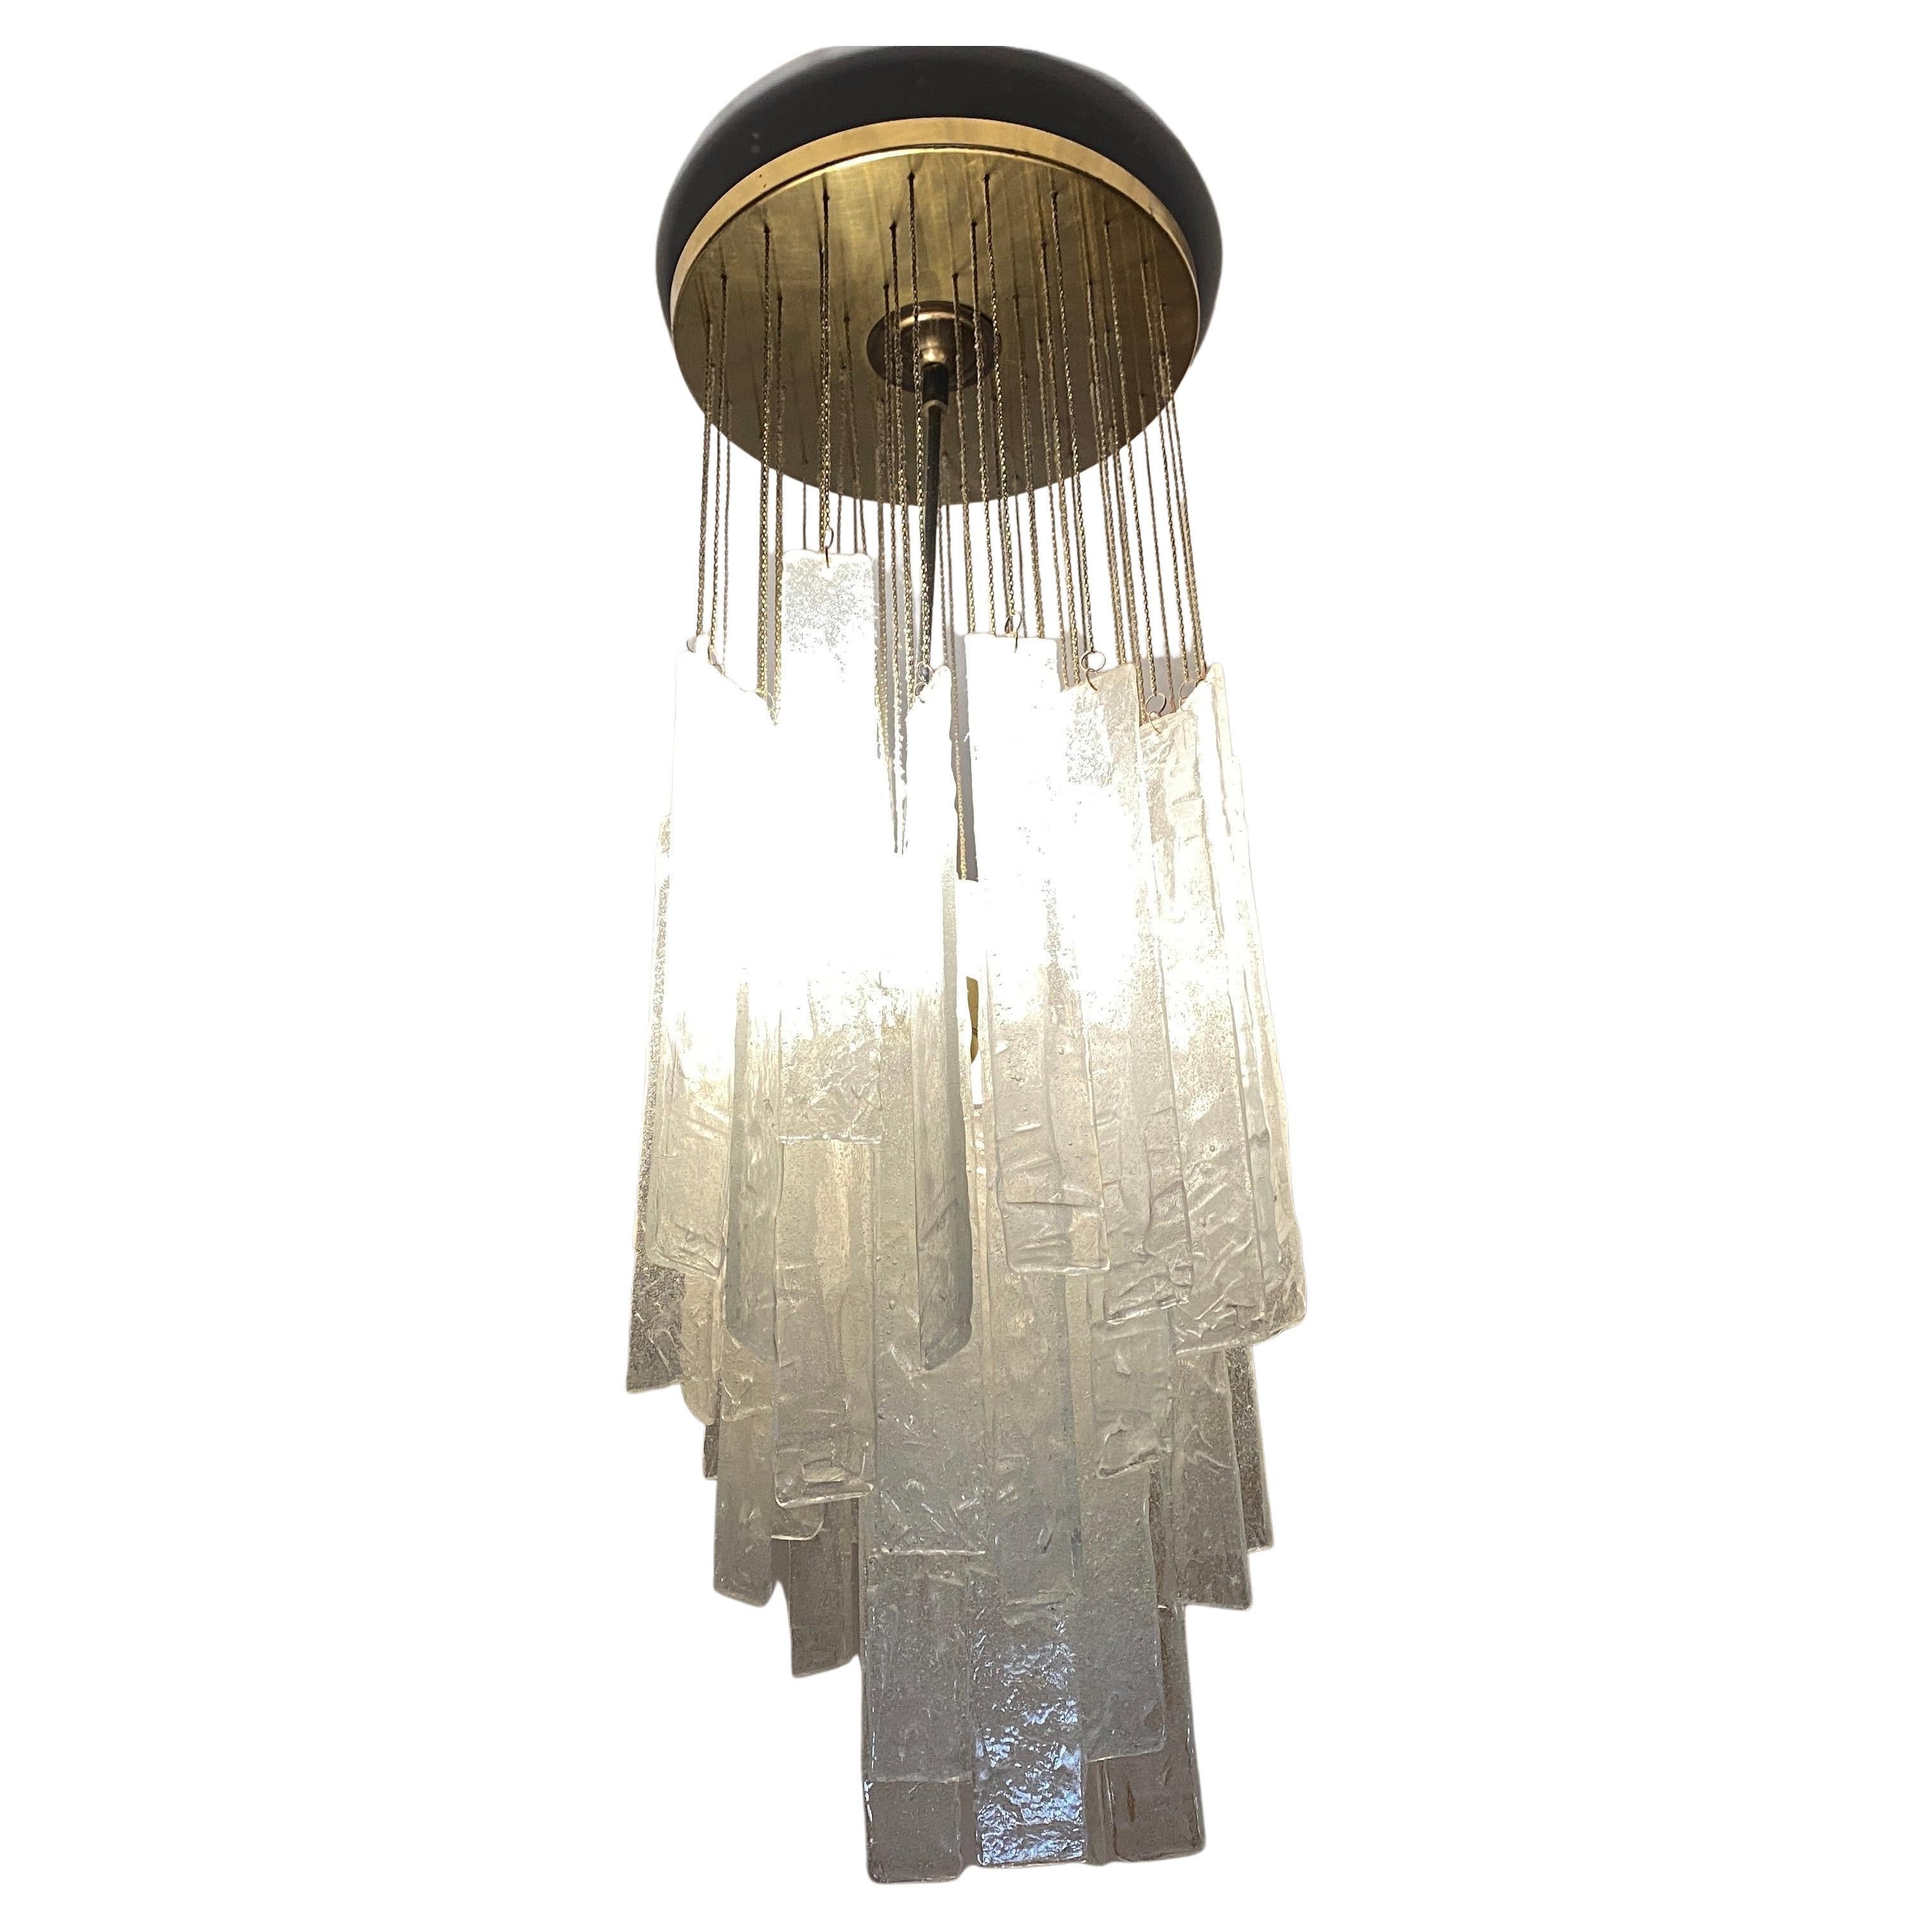 An amazing Mid-Century Modern murano glass and brass chandelier made in the Seventies by italian famous manufacturer AV Mazzega, brass it's in original patina, white and transparent glasses are in perfect conditions, it works 110-240 volts and need